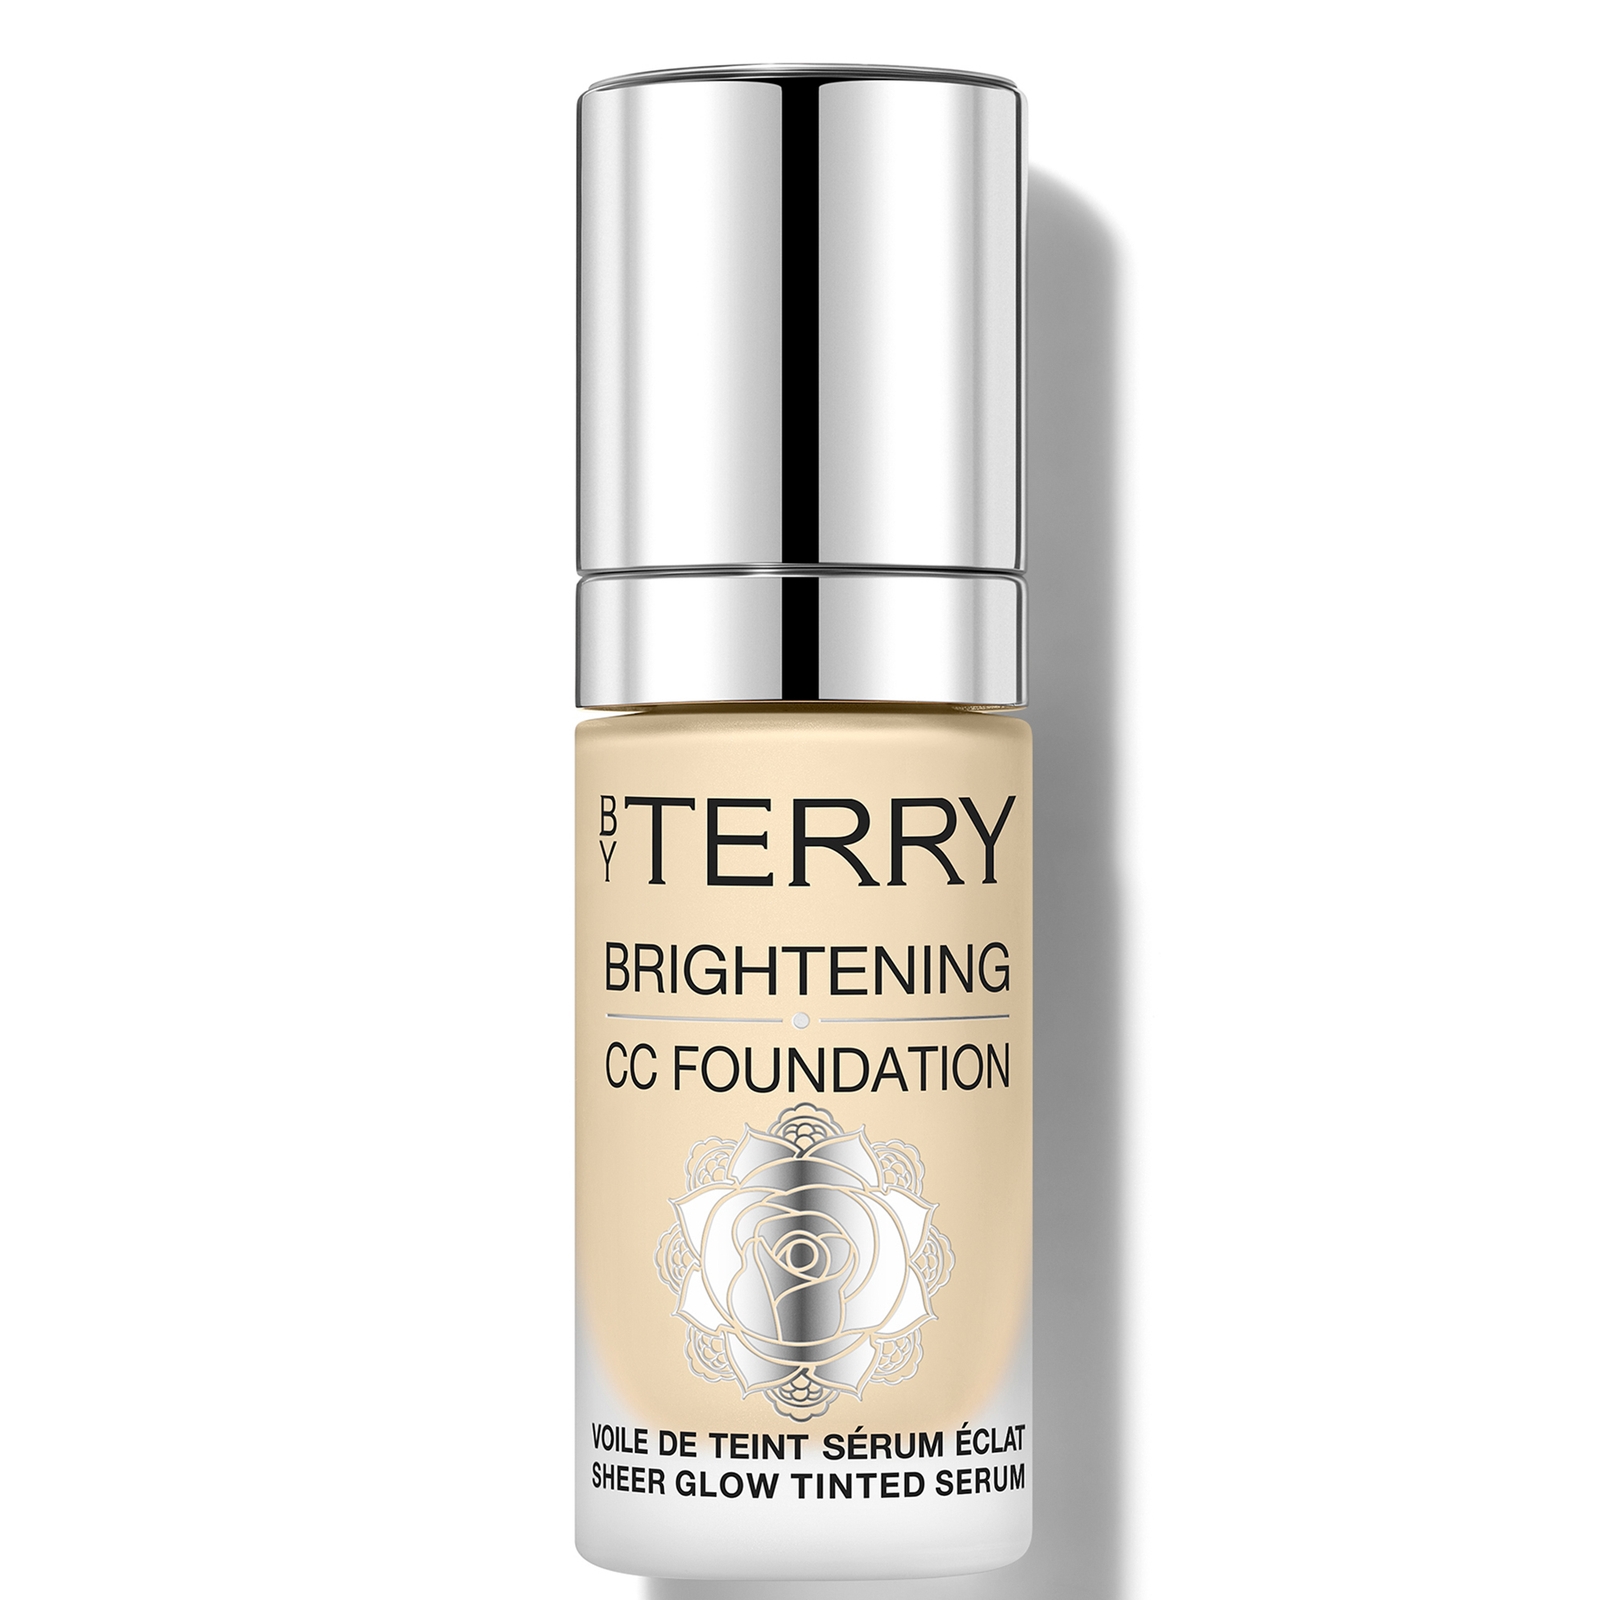 By Terry Brightening Cc Foundation 30ml (various Shades) - 1w In Neutral